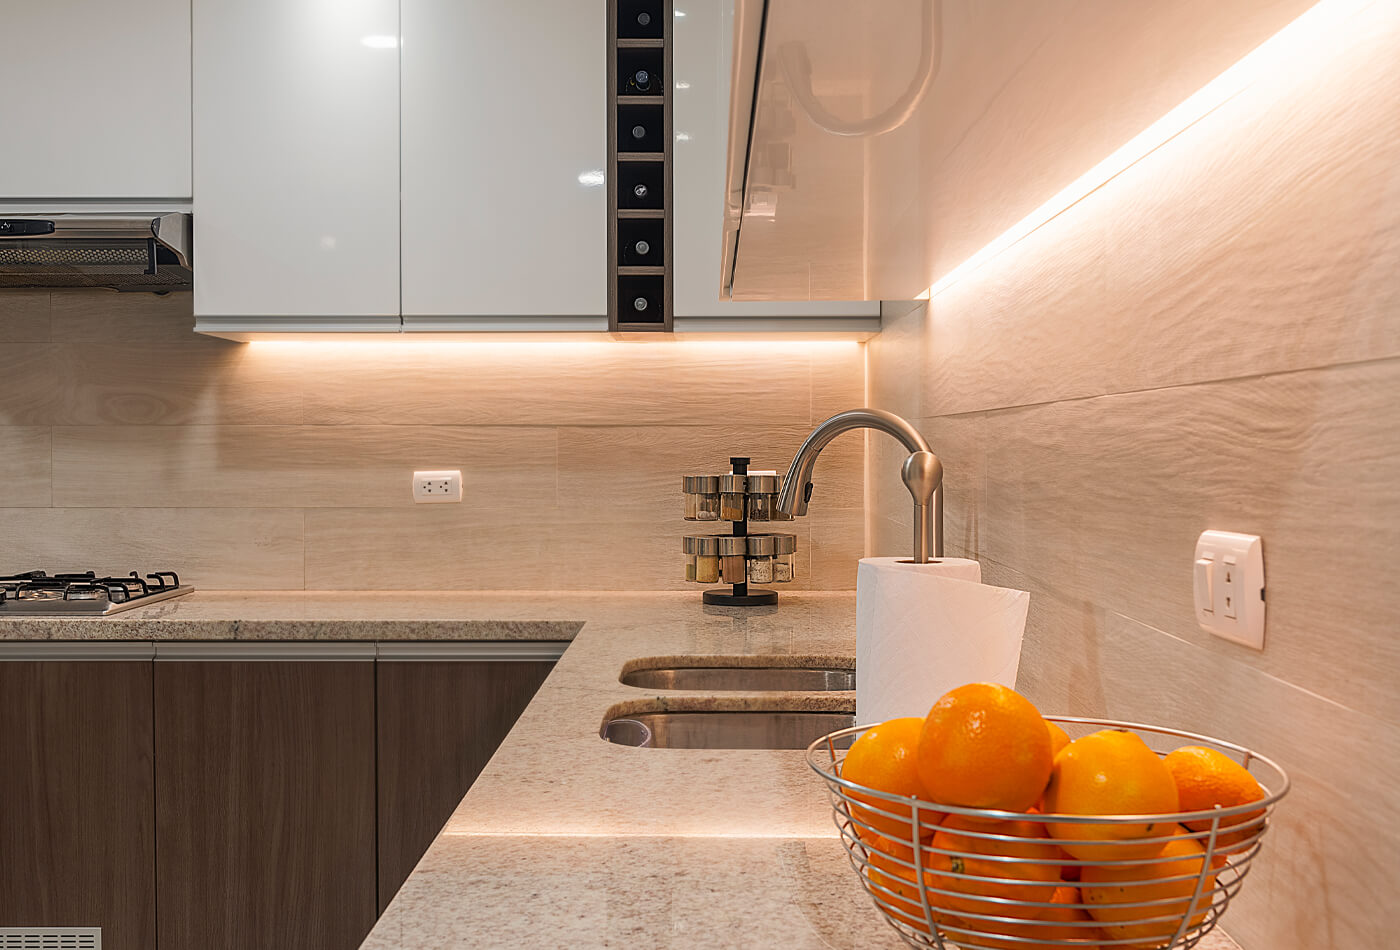 How To Choose The Right Tiles For Your Kitchen